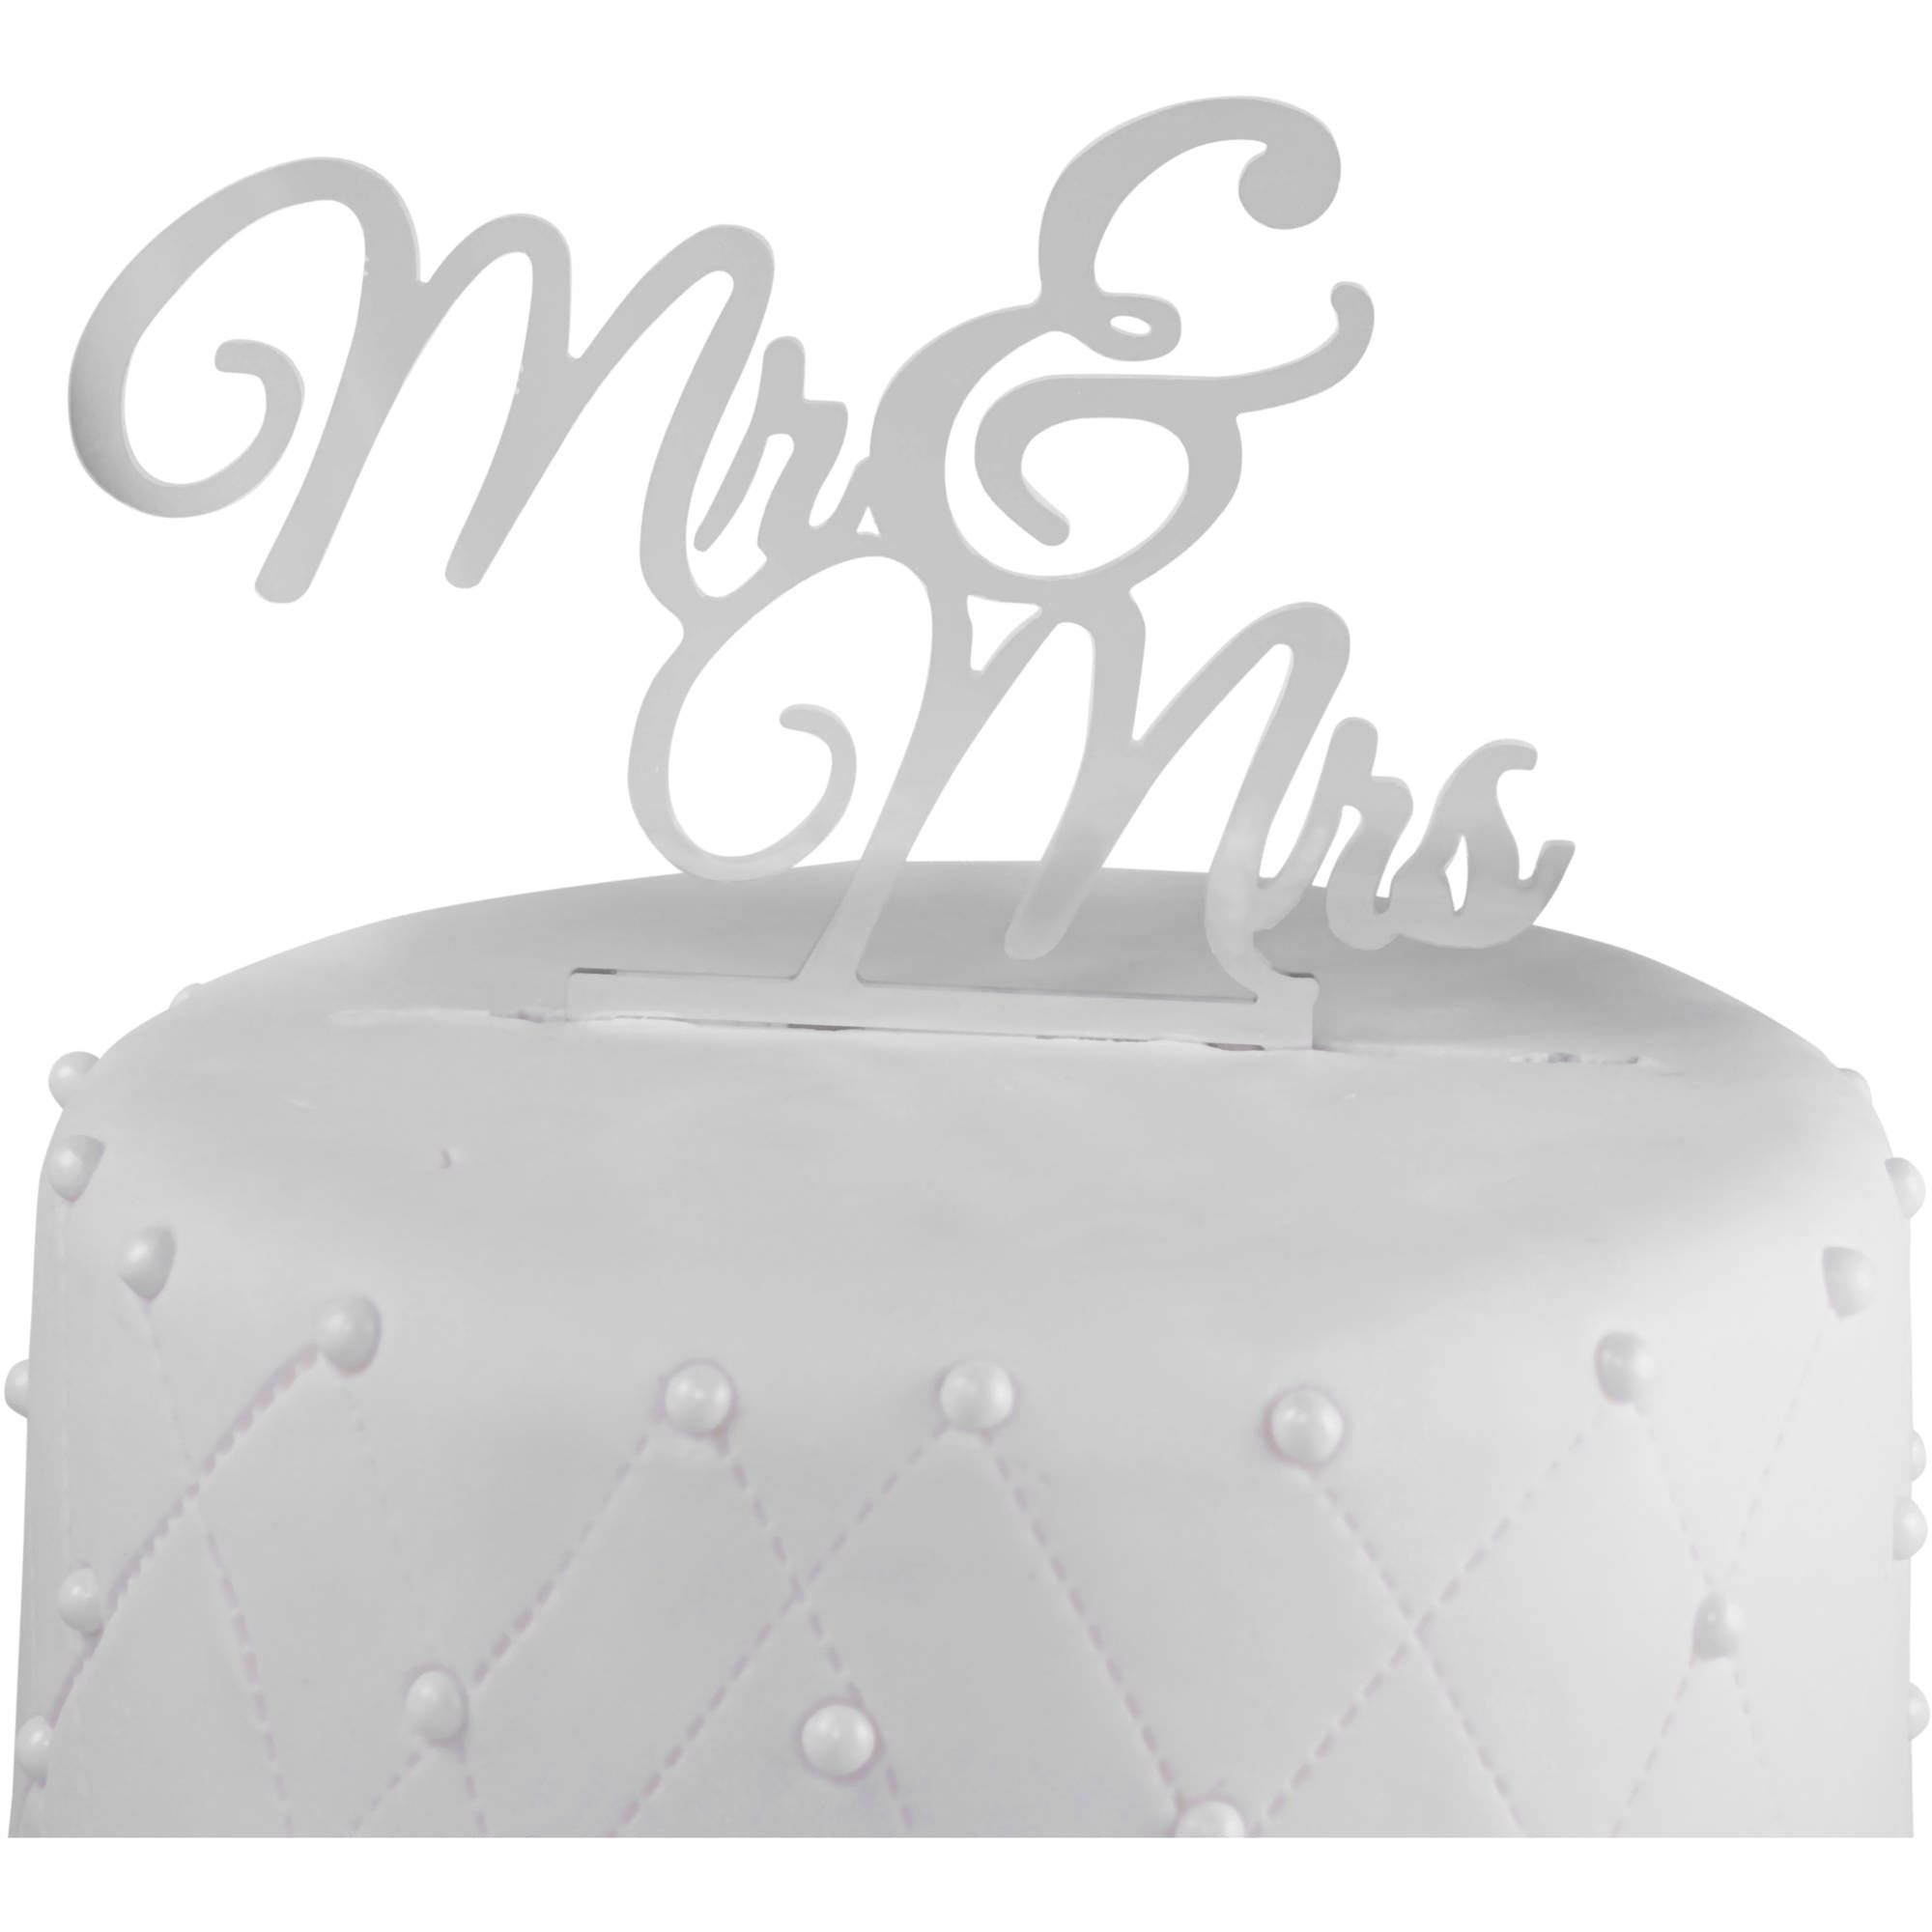 Silver Mr & Mrs Love Heart Acrylic Wedding Day Cake Topper Silhouette 